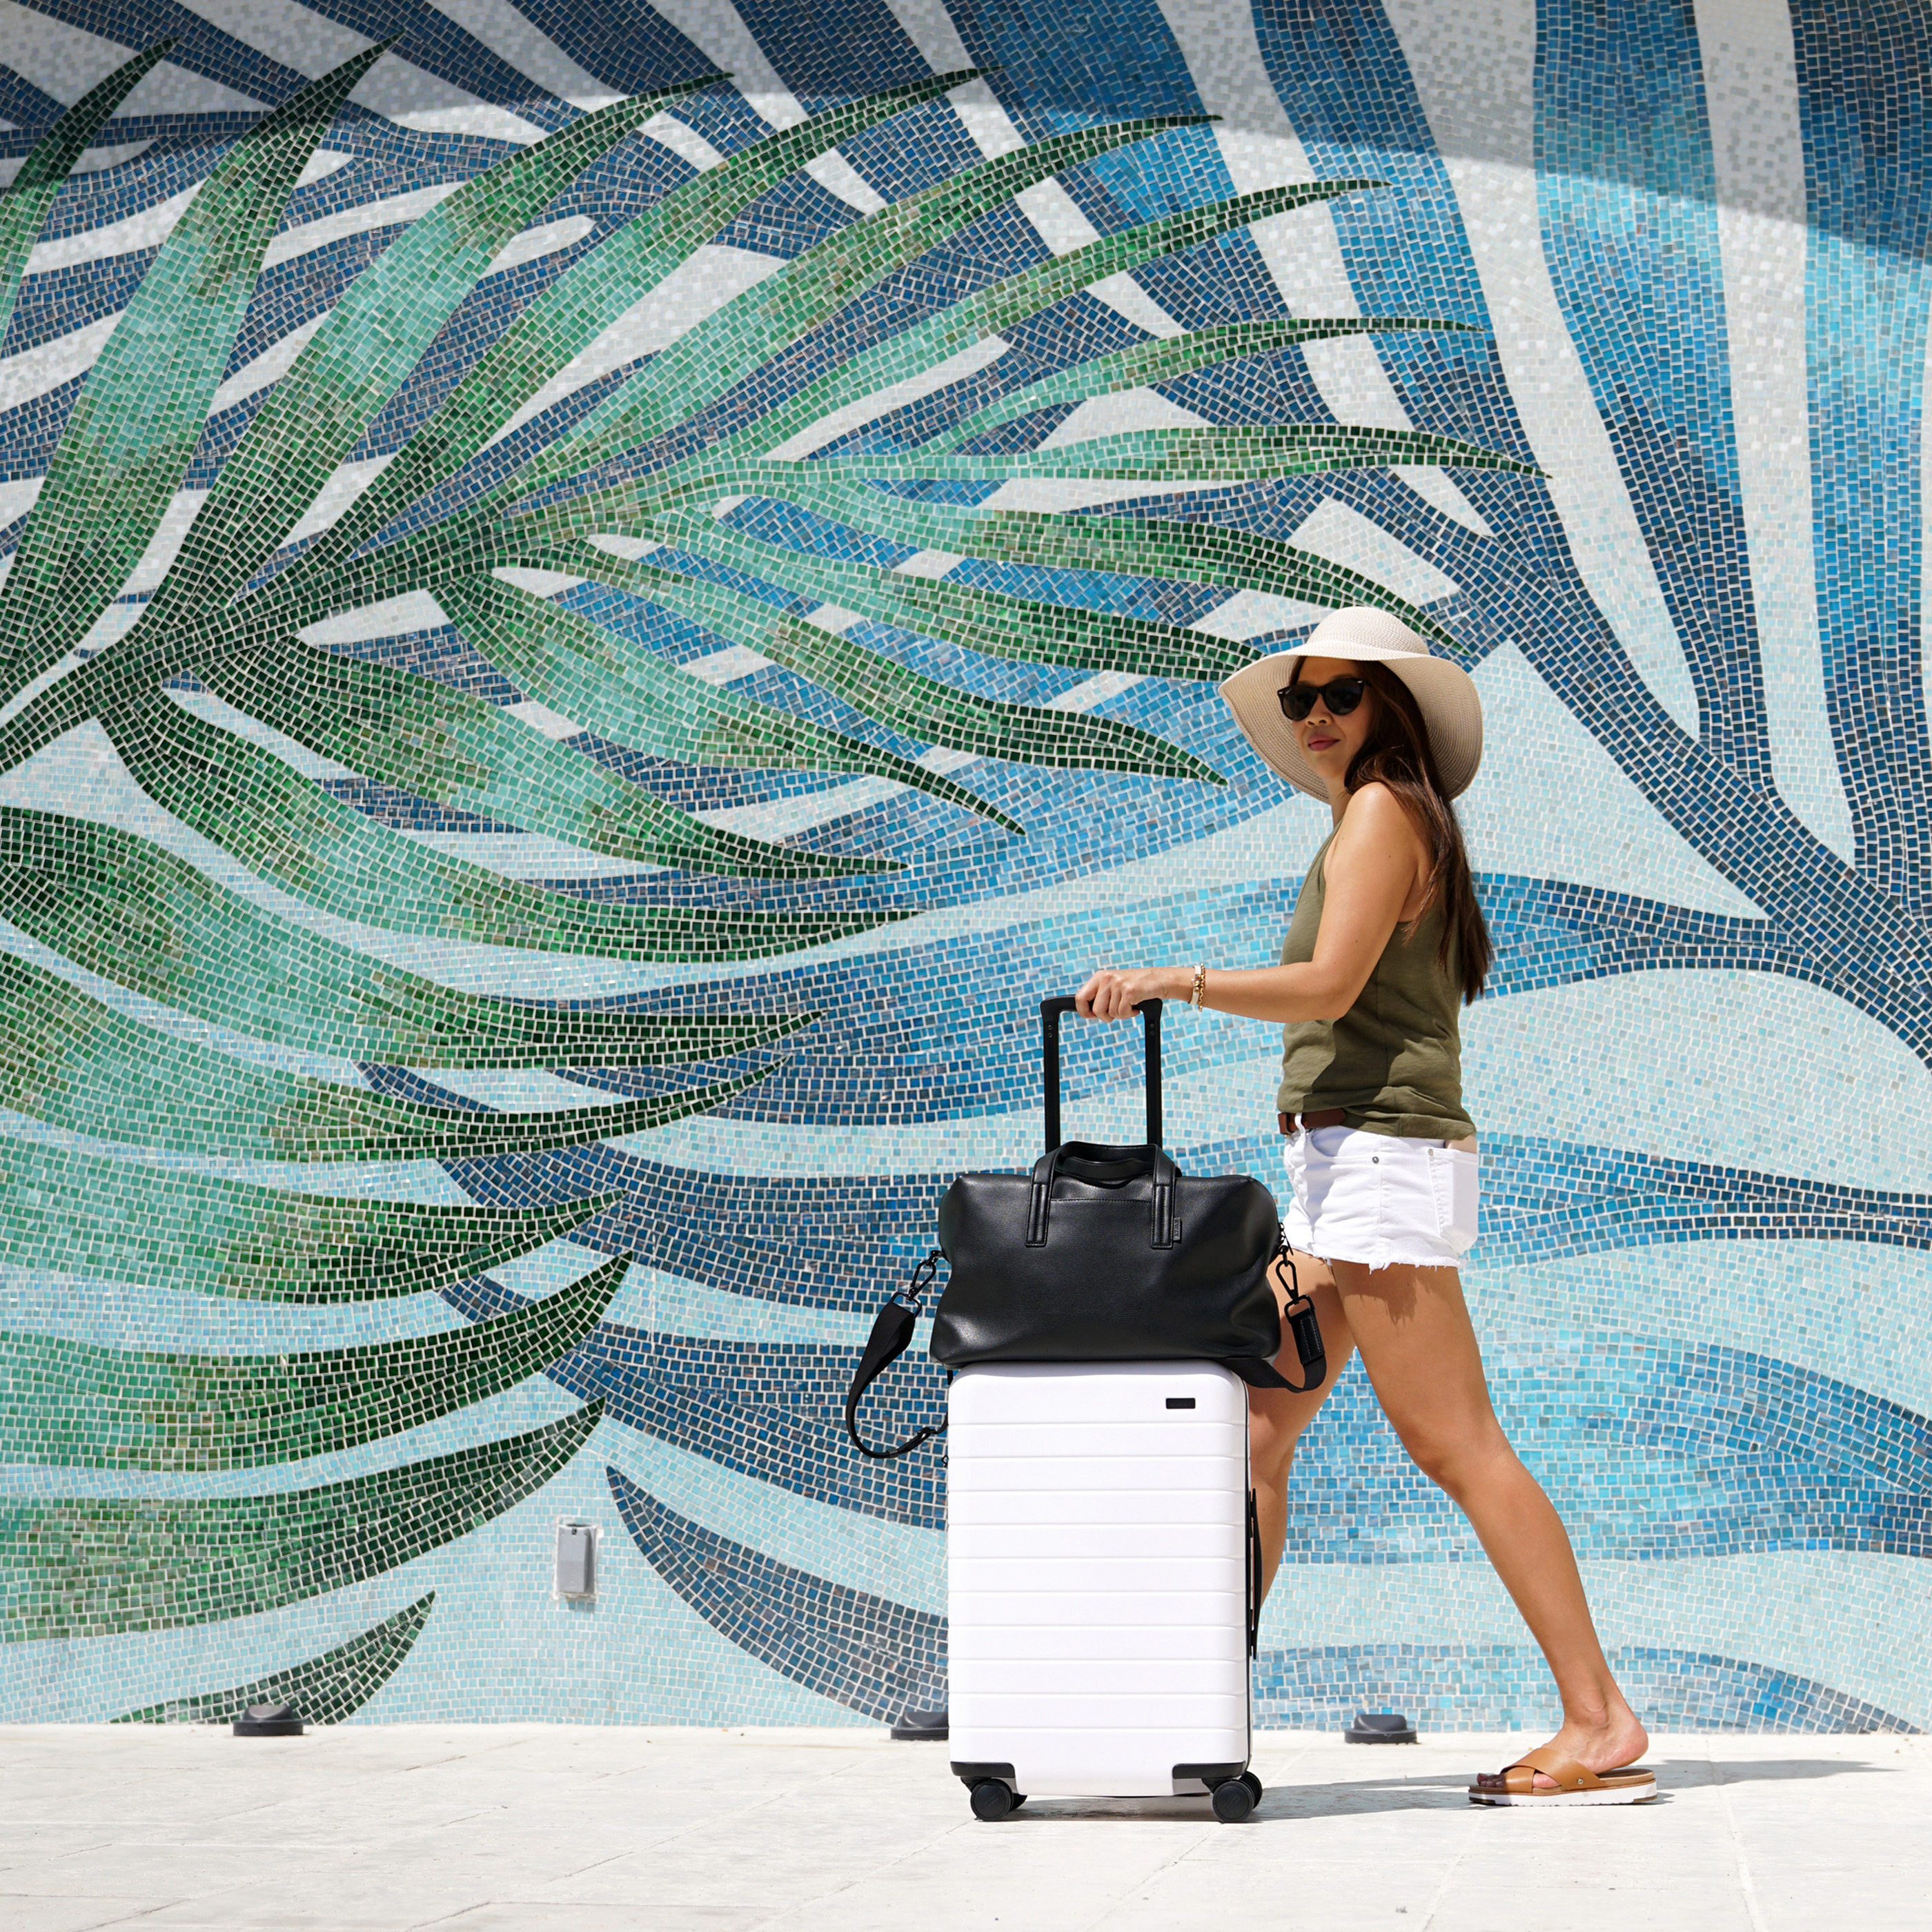 suitcase online shopping